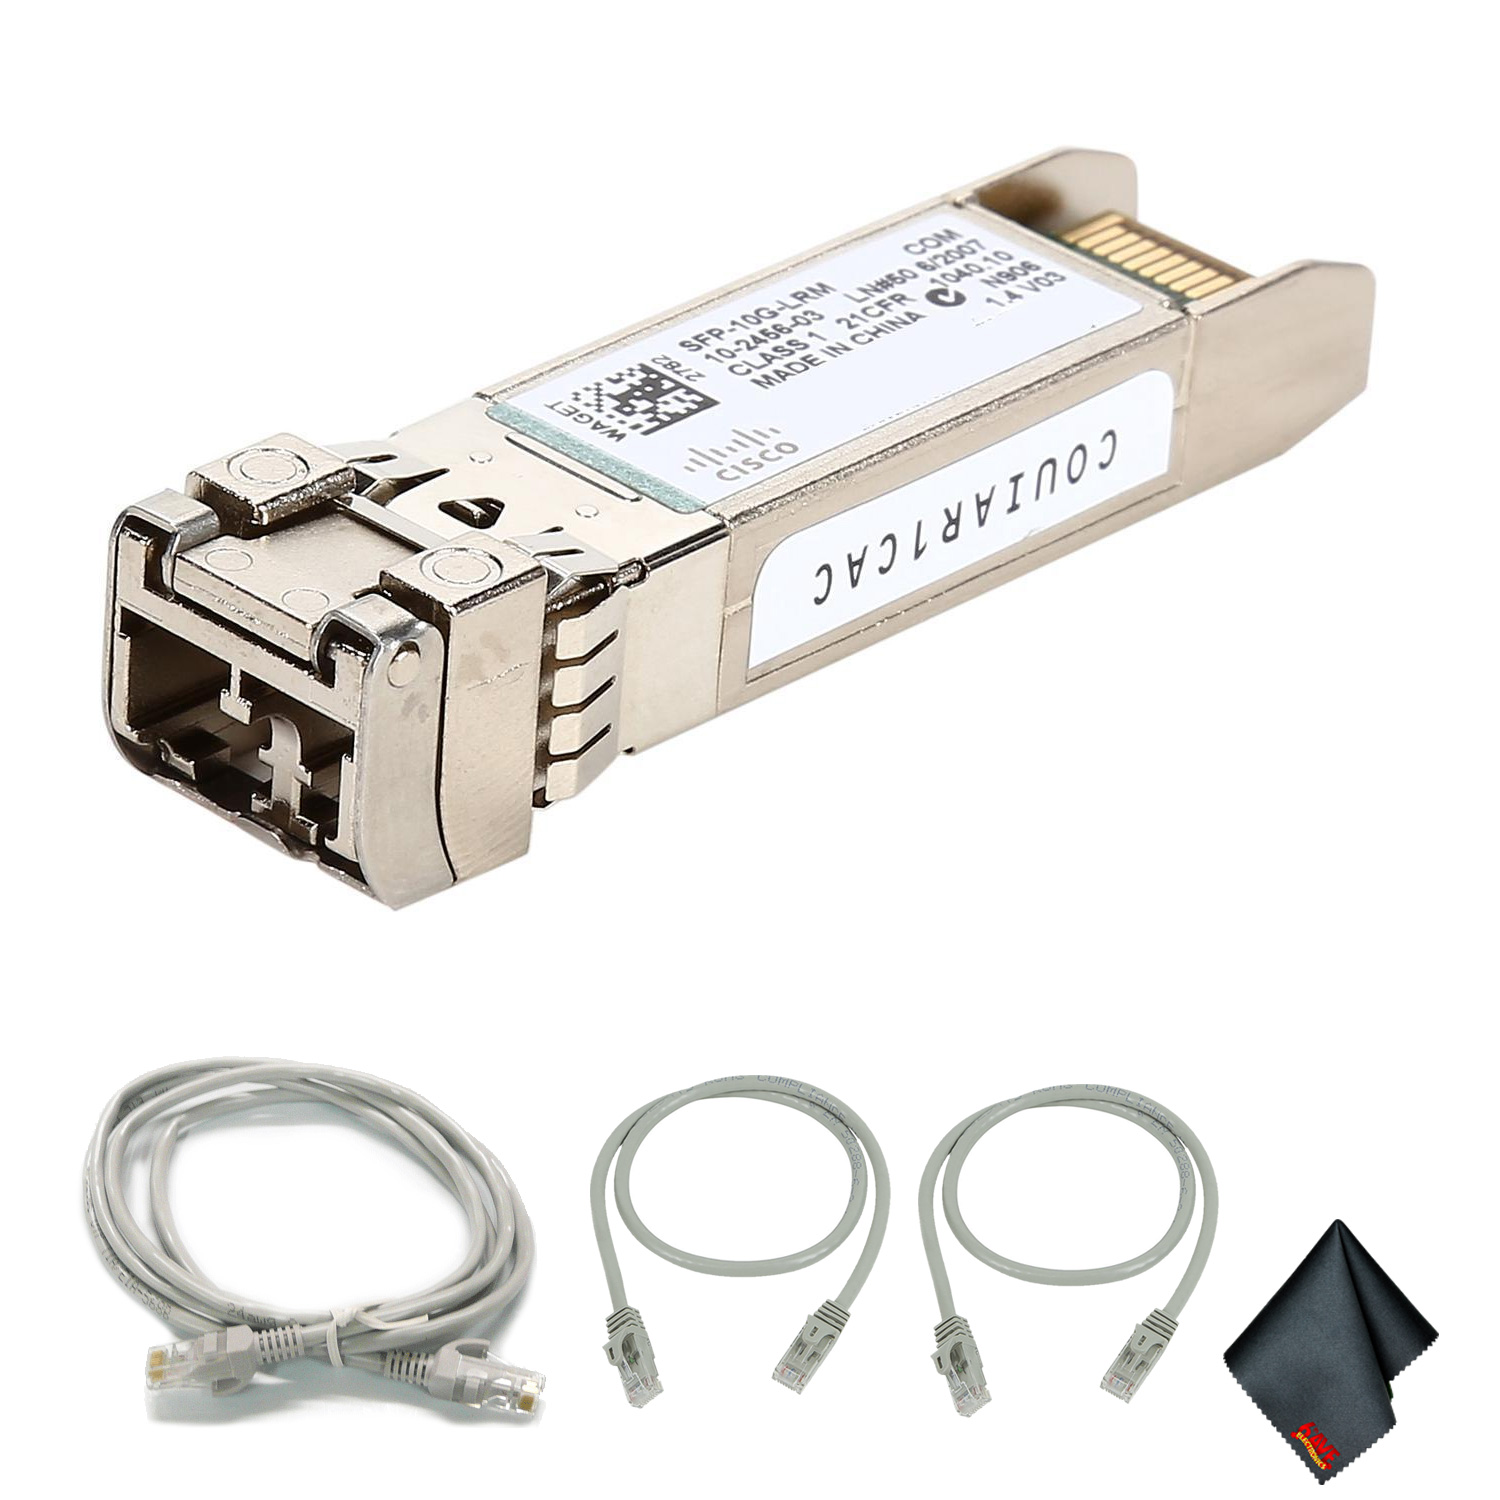 Cisco SFP-10G-LRM 10 Gigabit Interface Converter with Extra Cat5 Cables (1-Pack) - image 1 of 2